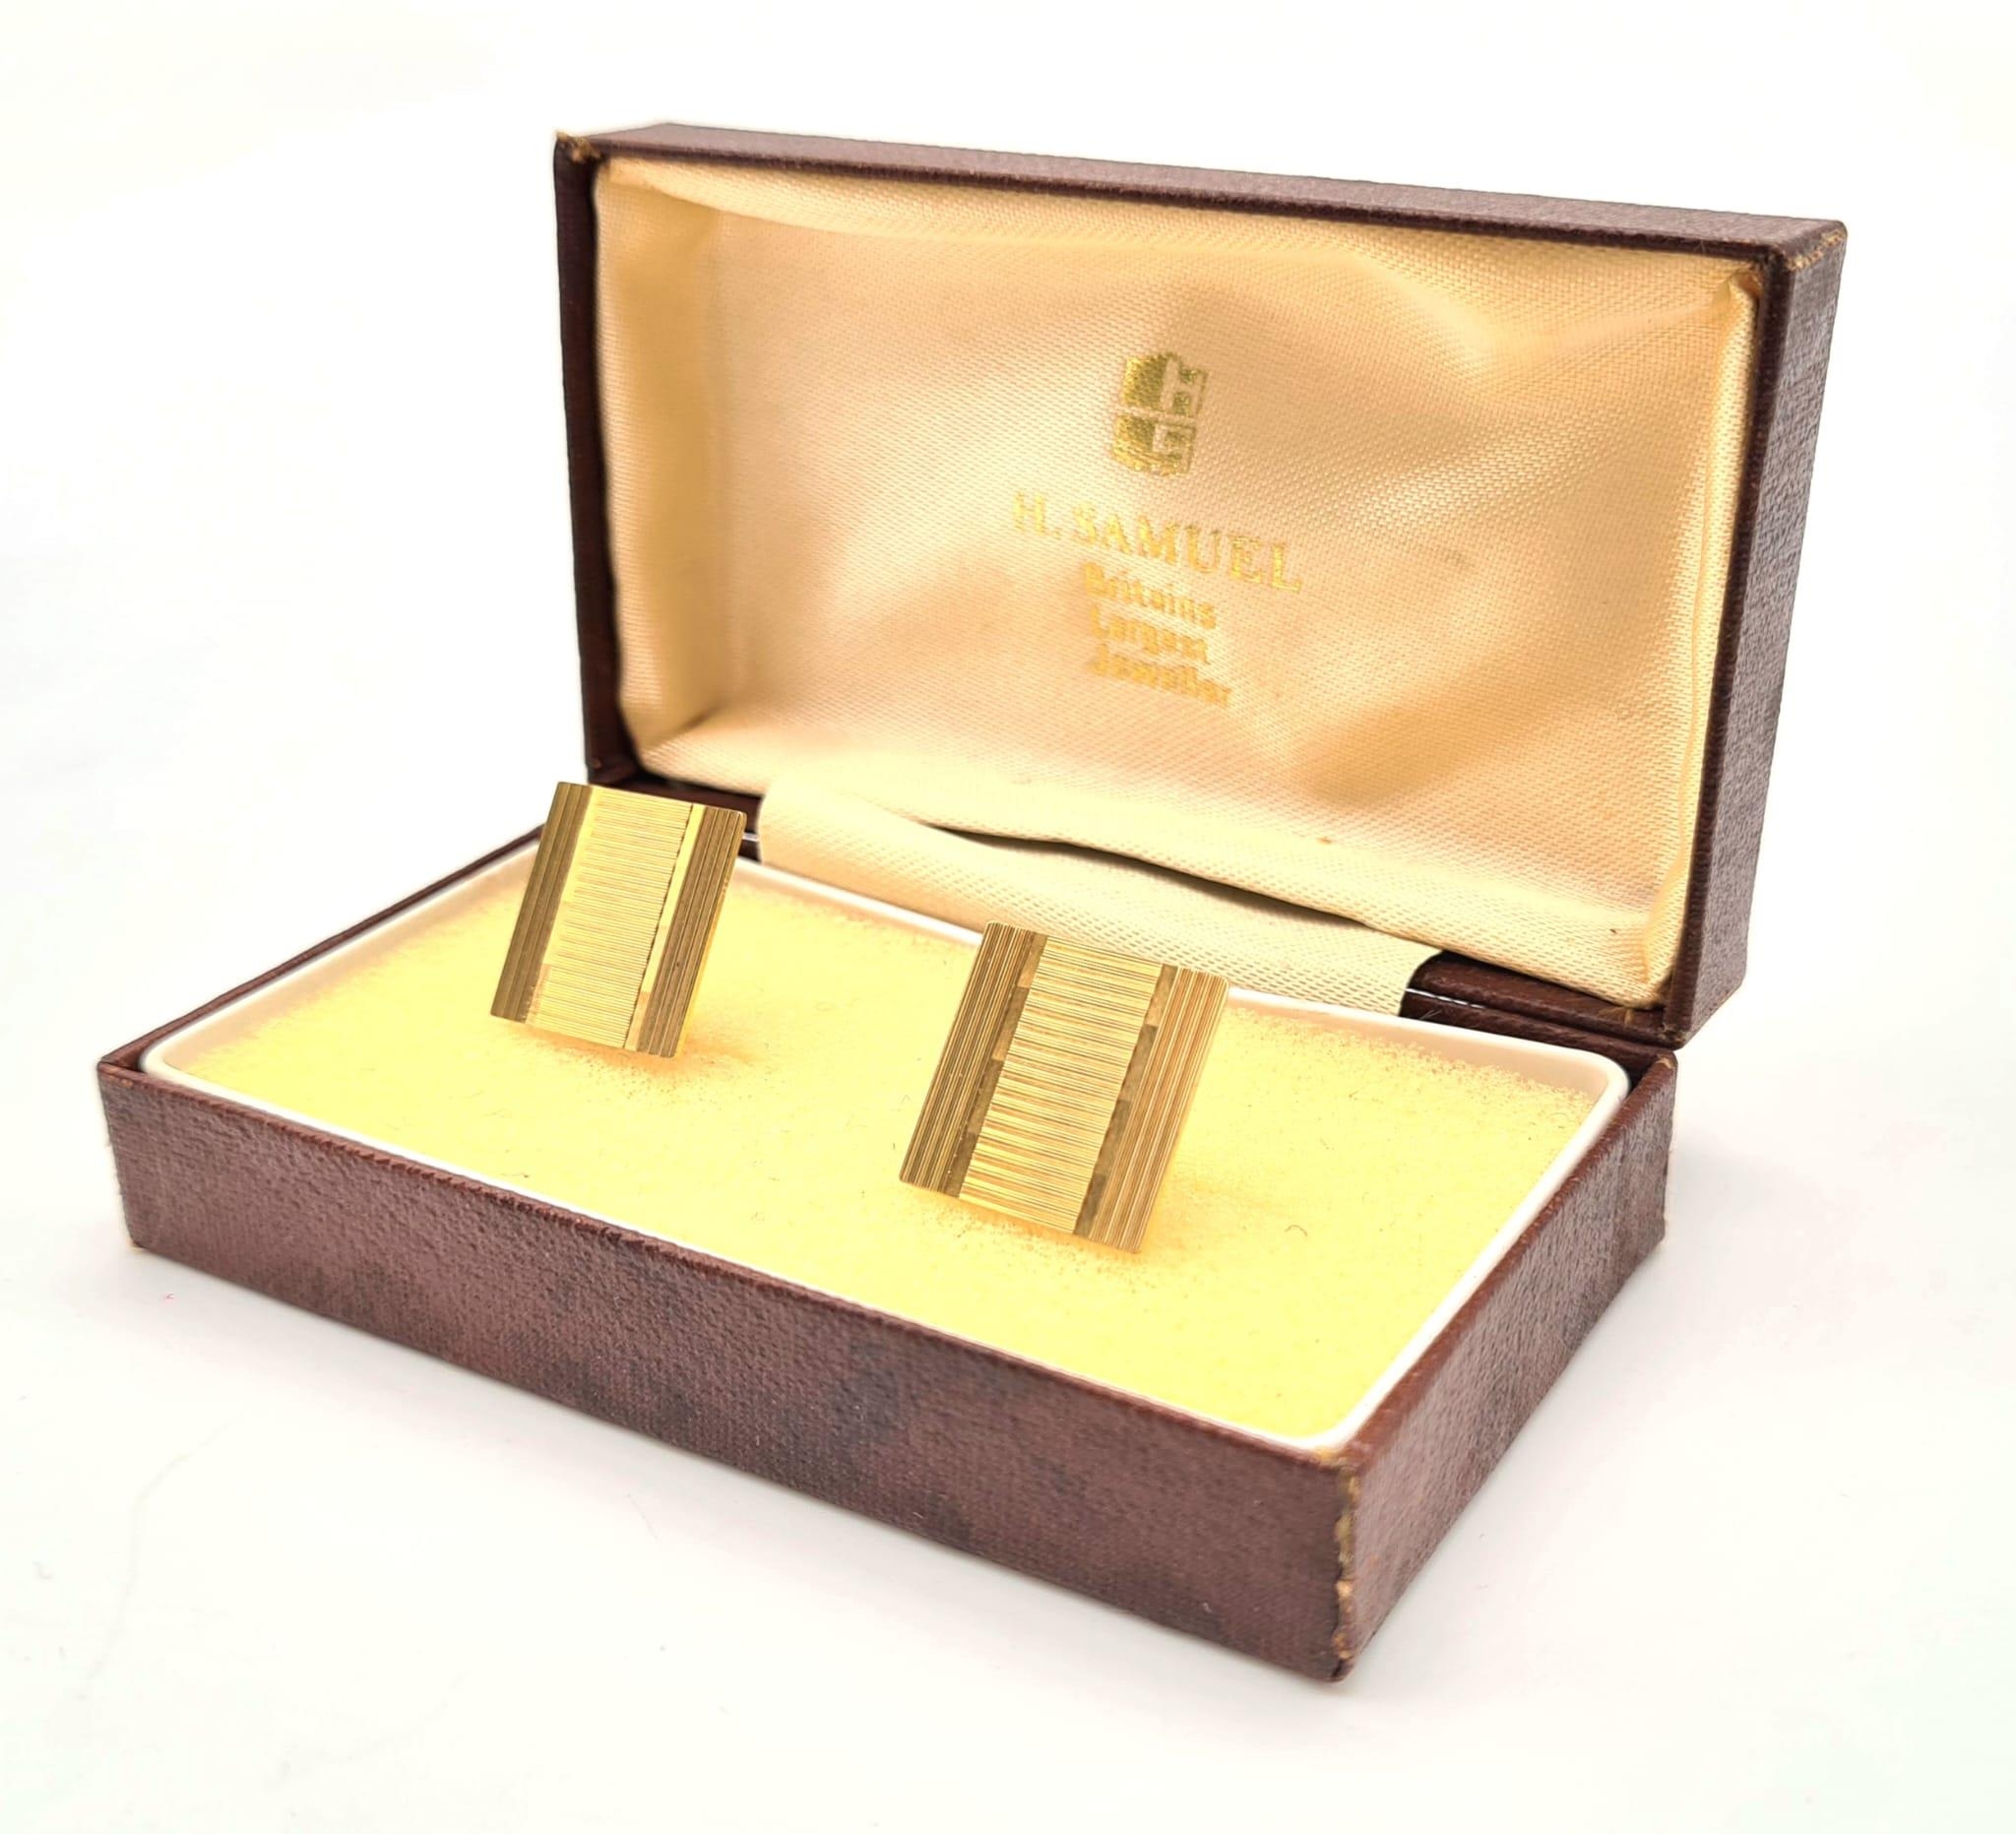 A Pair of Vintage 9K Yellow Gold Flat-Square Cufflinks - these are making a comeback! 7.06g total